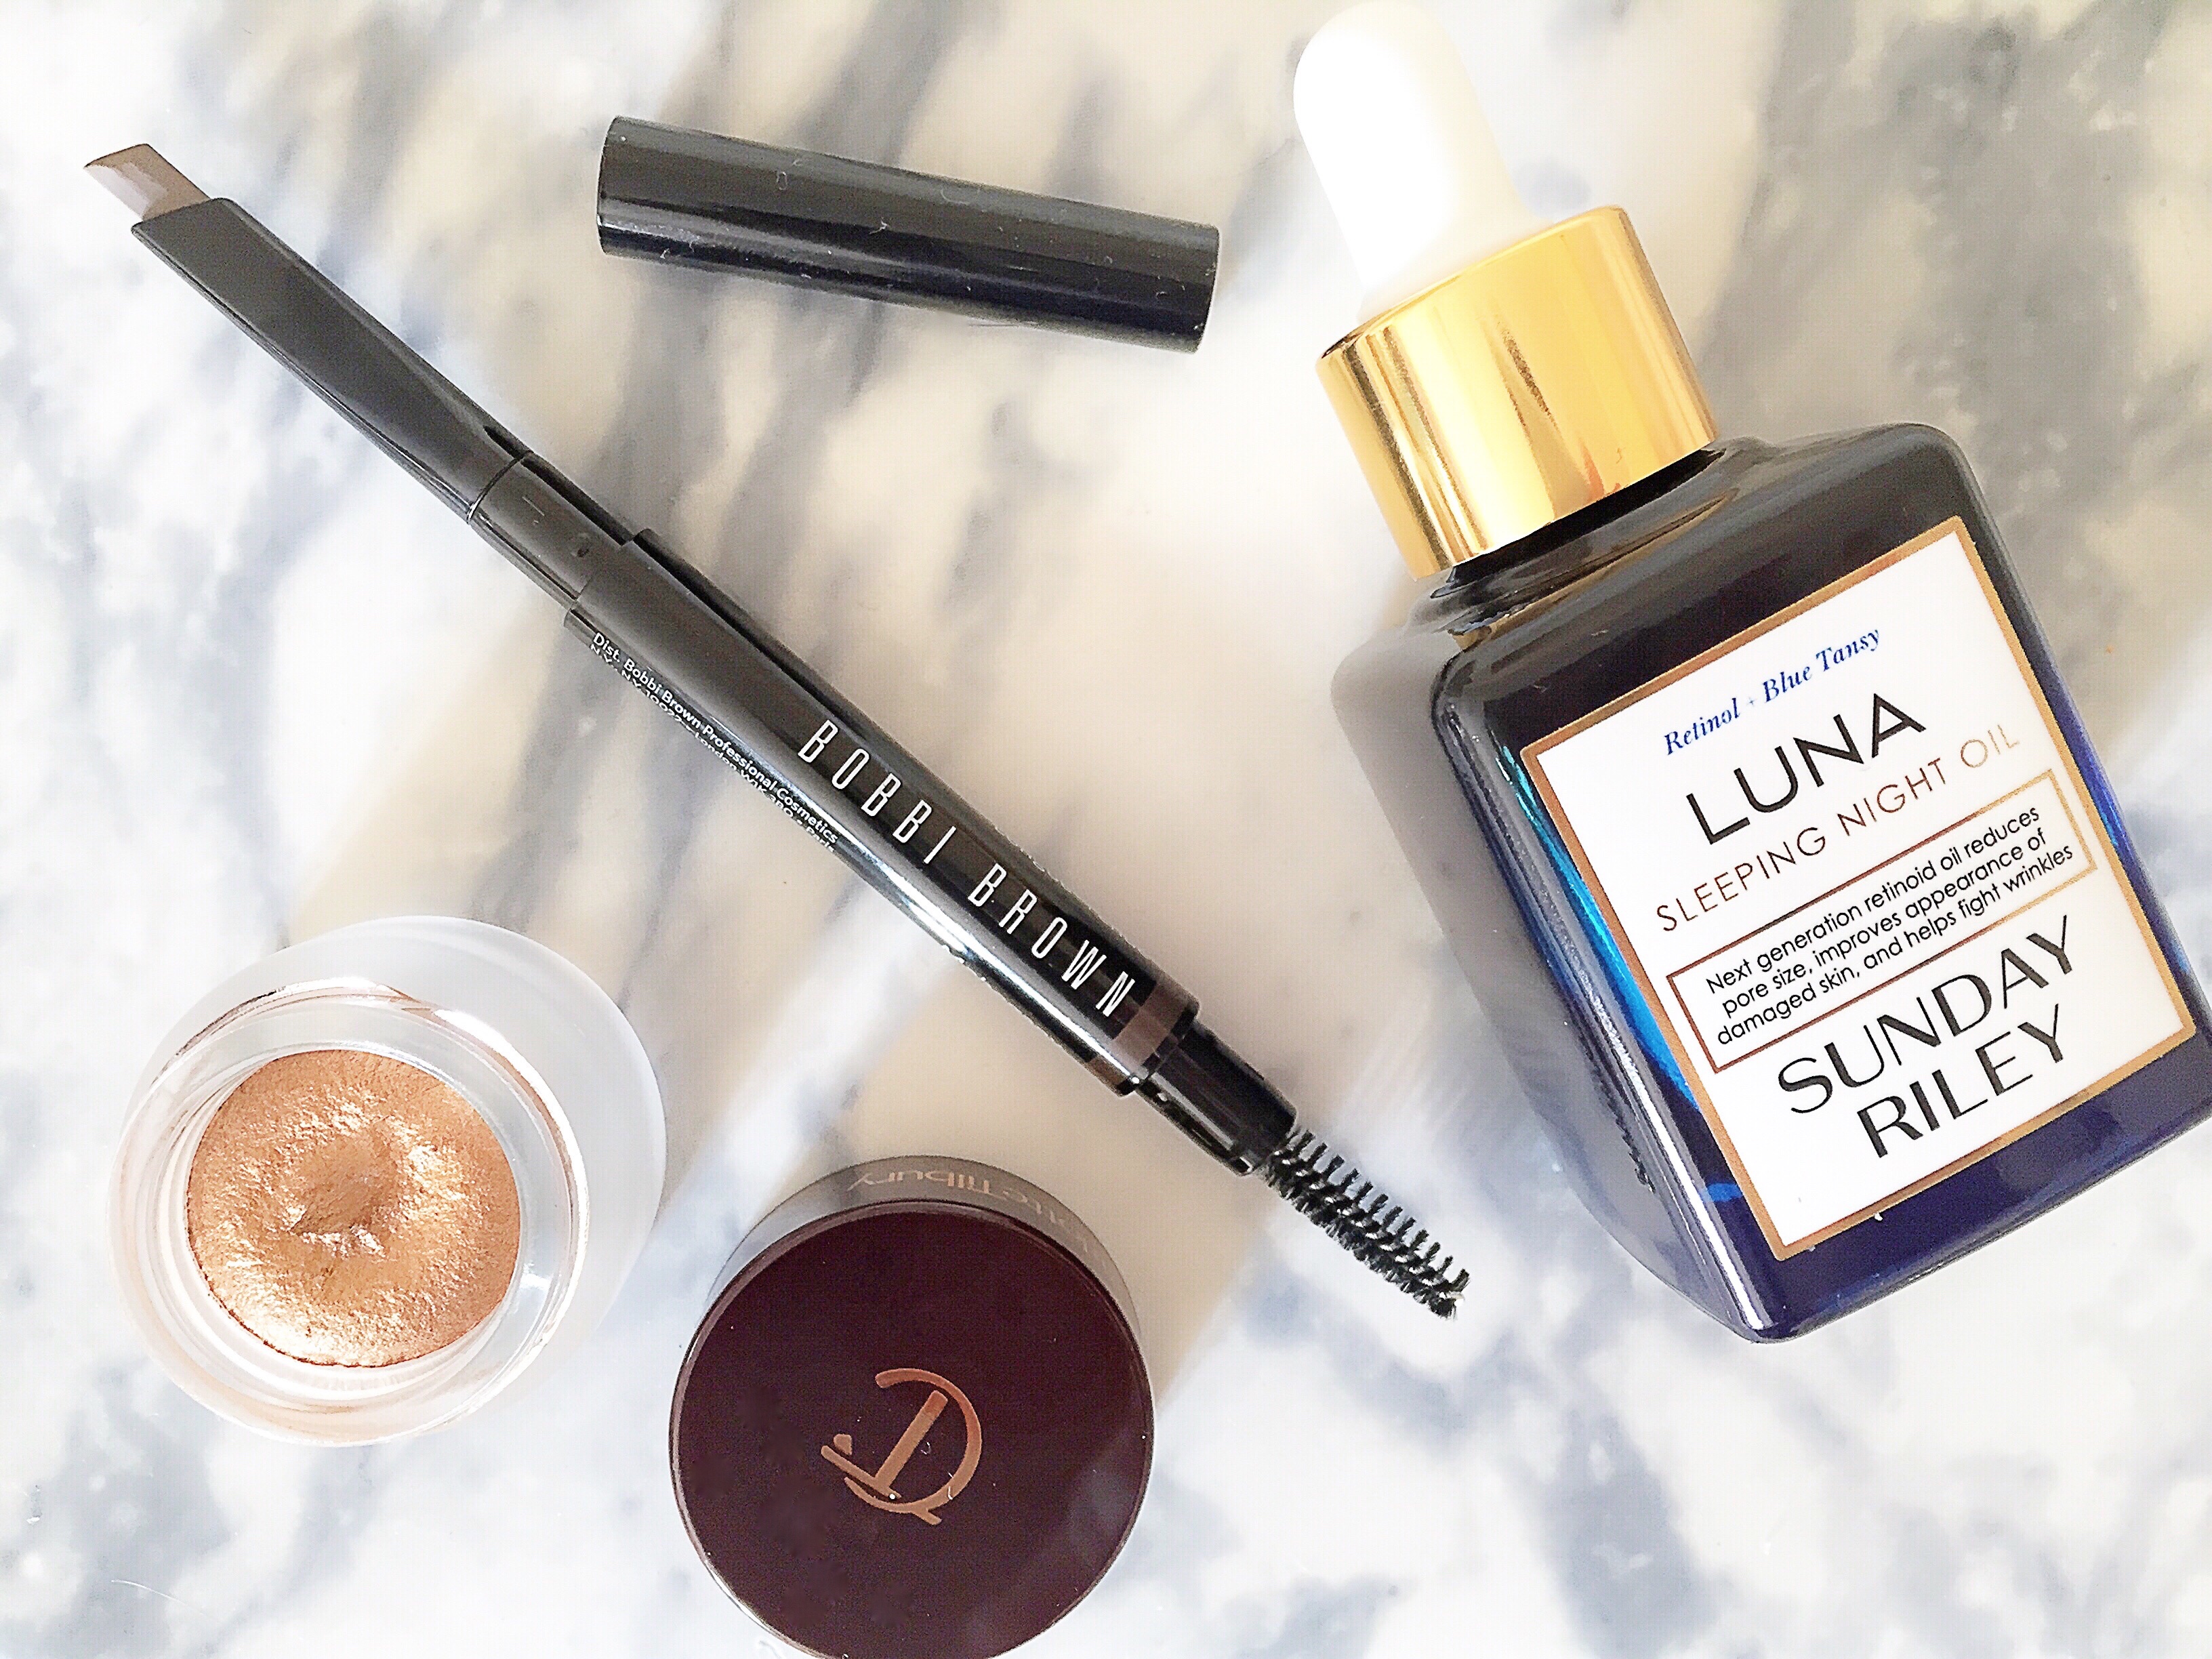 Luna Oil and other beauty purchases